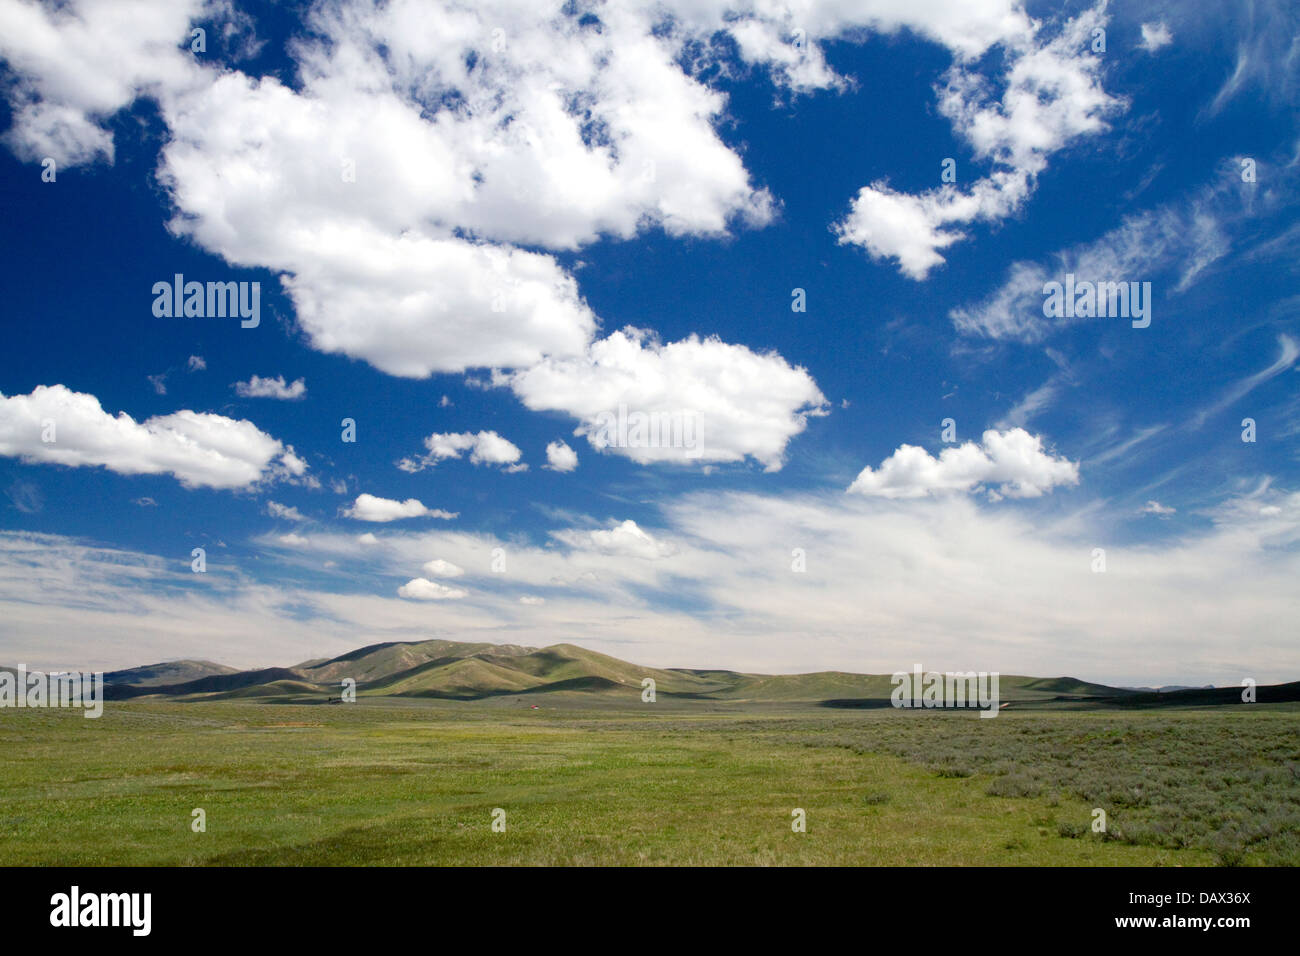 Cumulus clouds and blue sky over green fields near Pine, Idaho, USA. Stock Photo